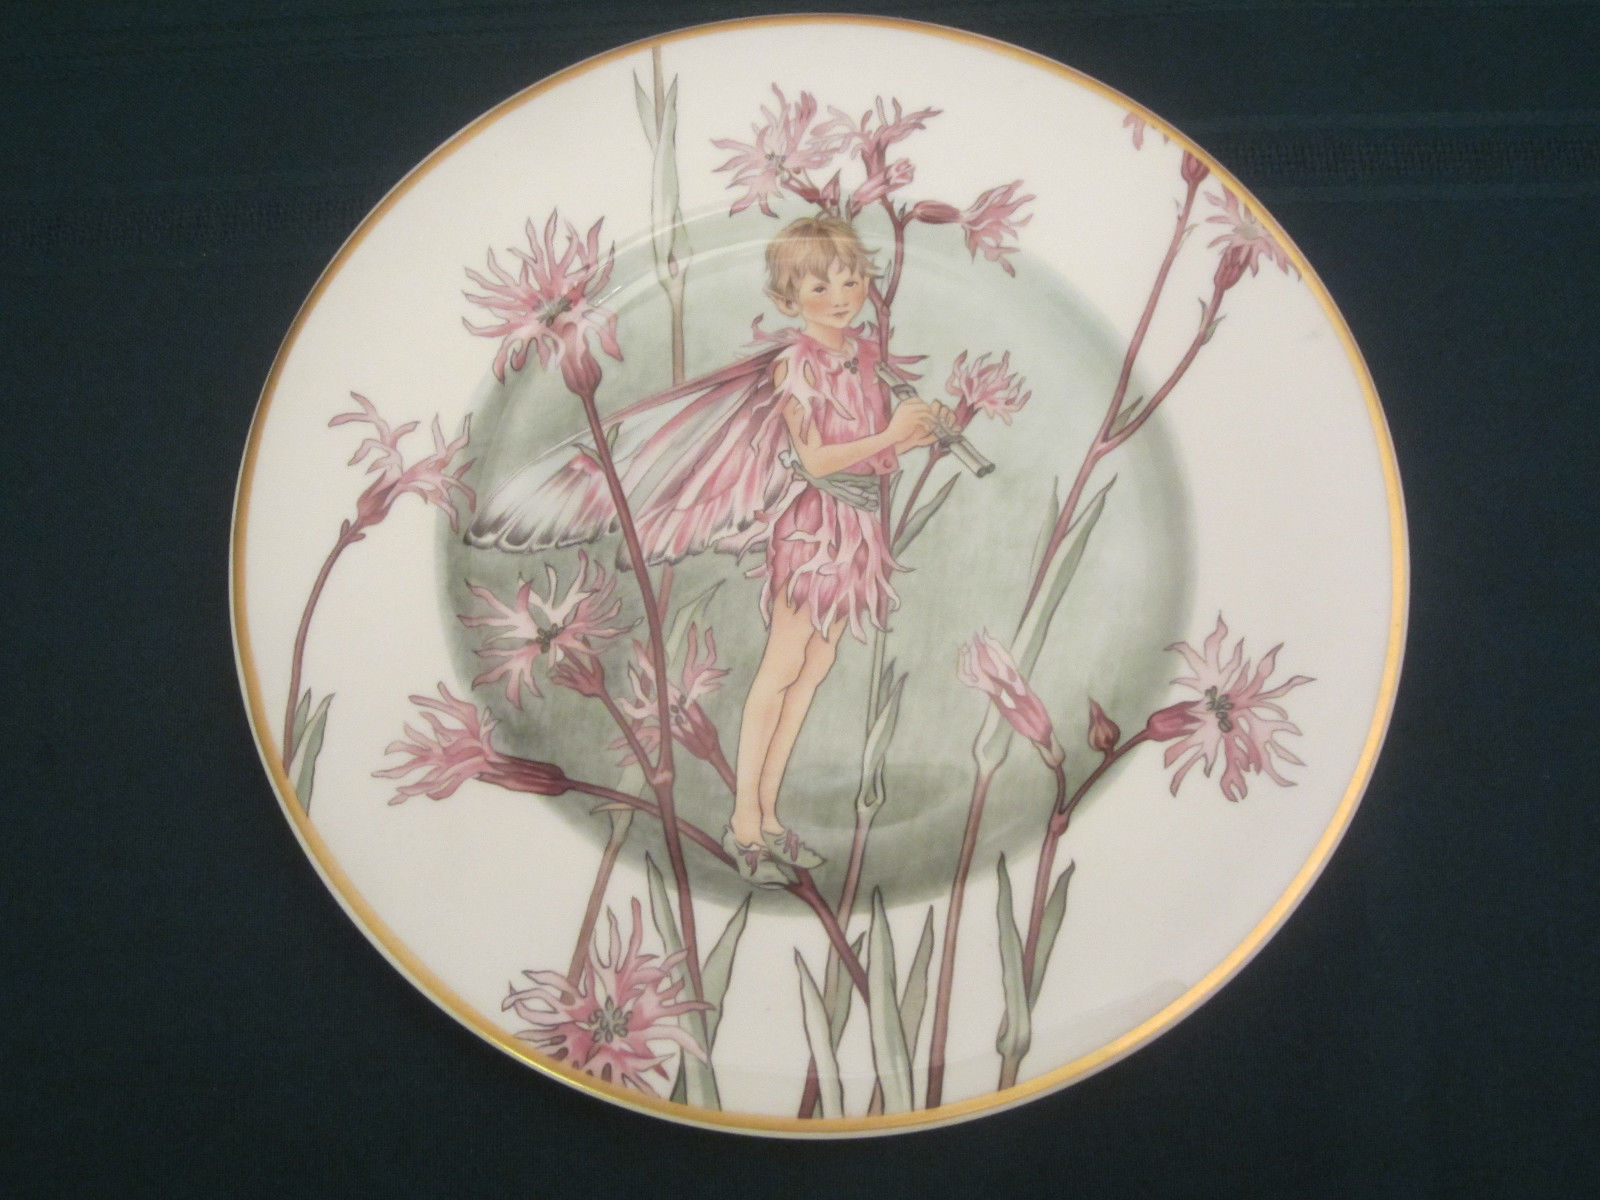 RAGGED ROBIN Cicely Mary Barker PLATE - FAIRIES OF THE FIELDS AND FLOWERS Rare - $28.00